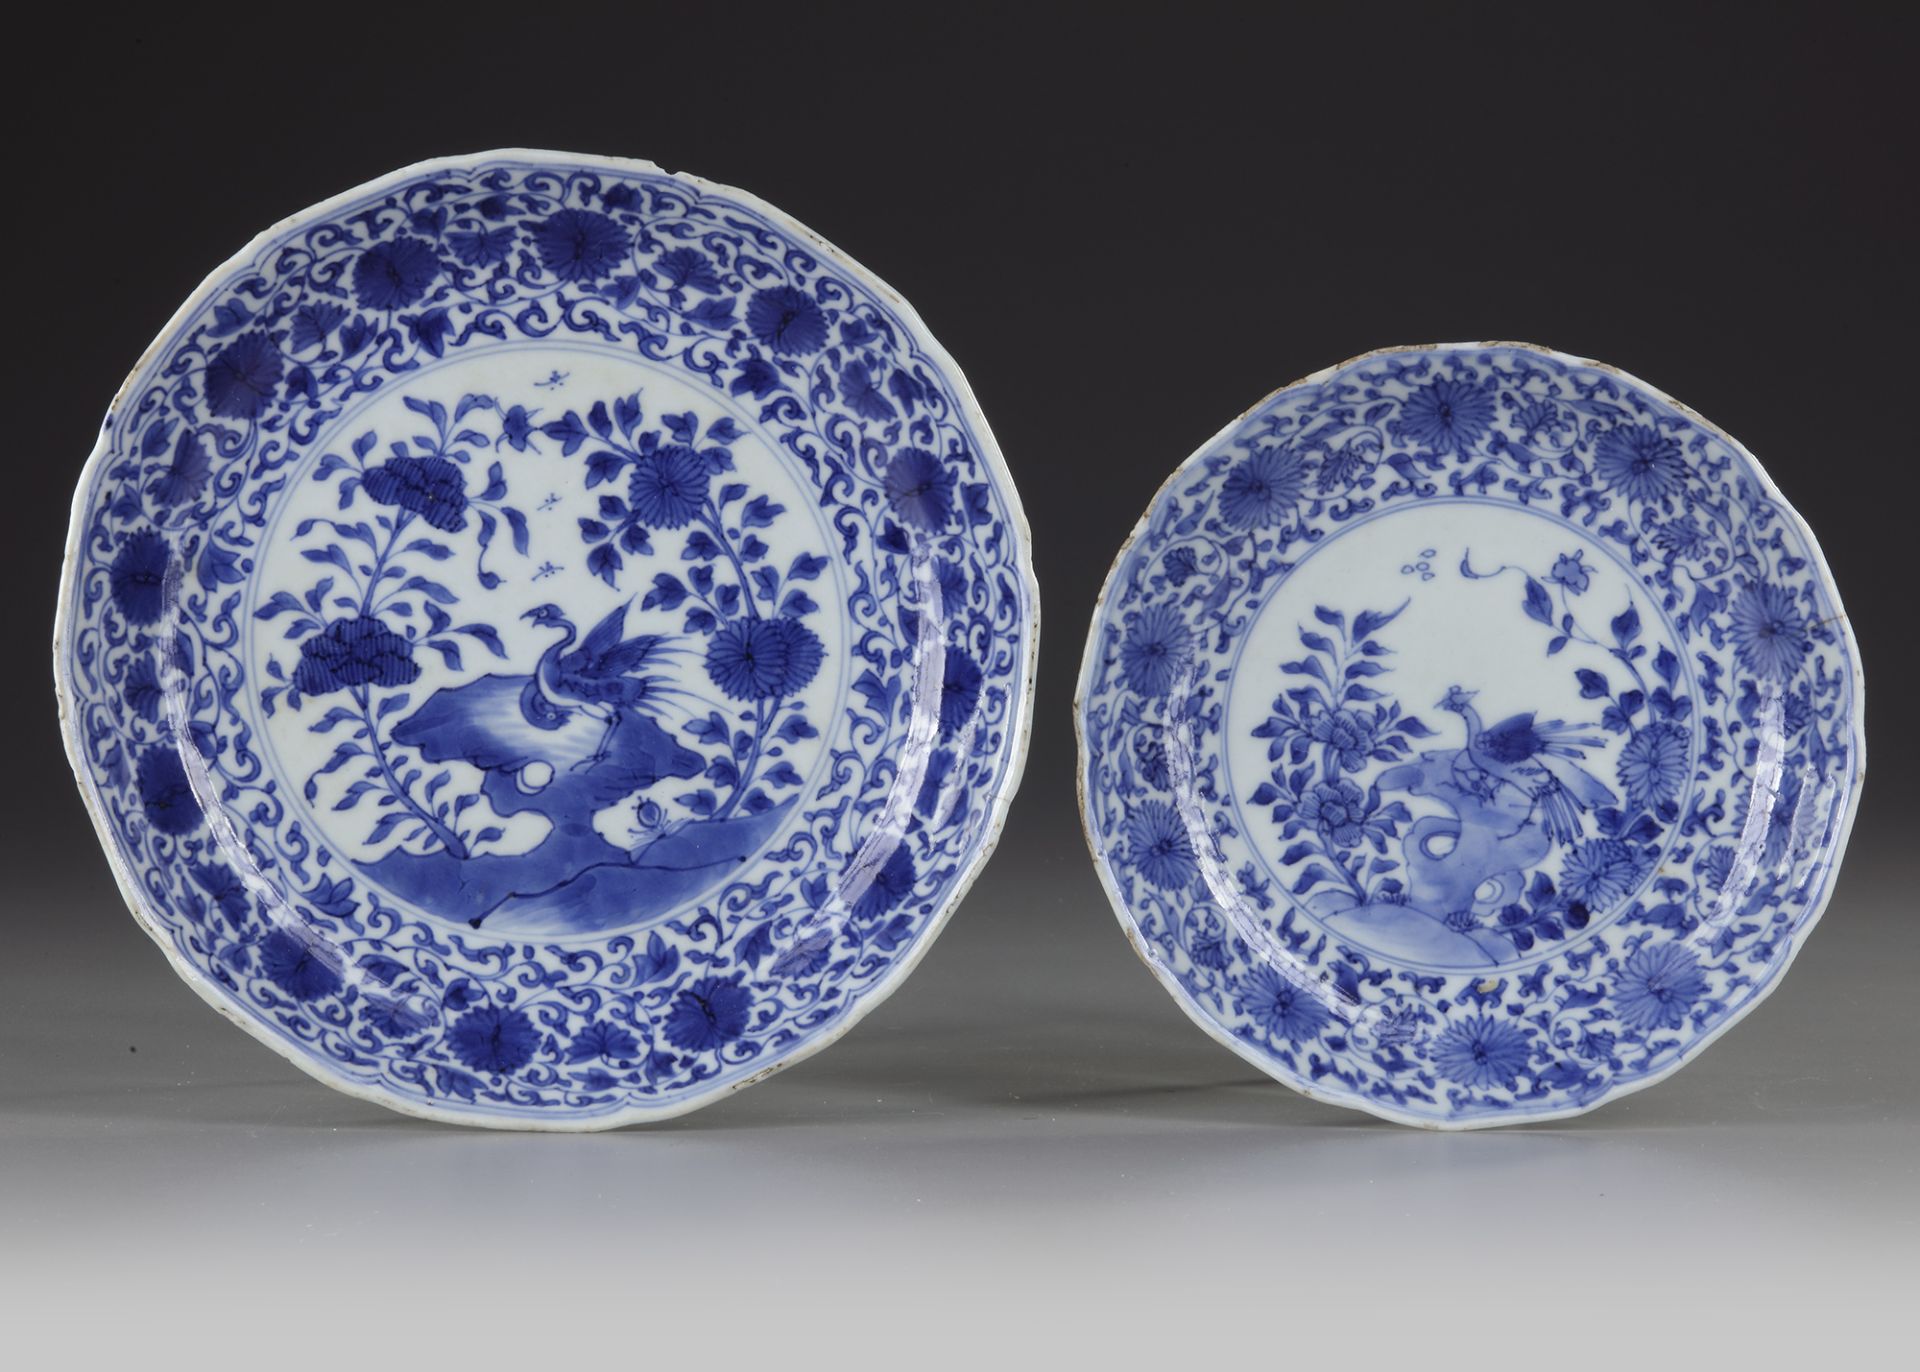 TWO CHINESE BLUE AND WHITE DISHES, KANGXI PERIOD (1662-1722)